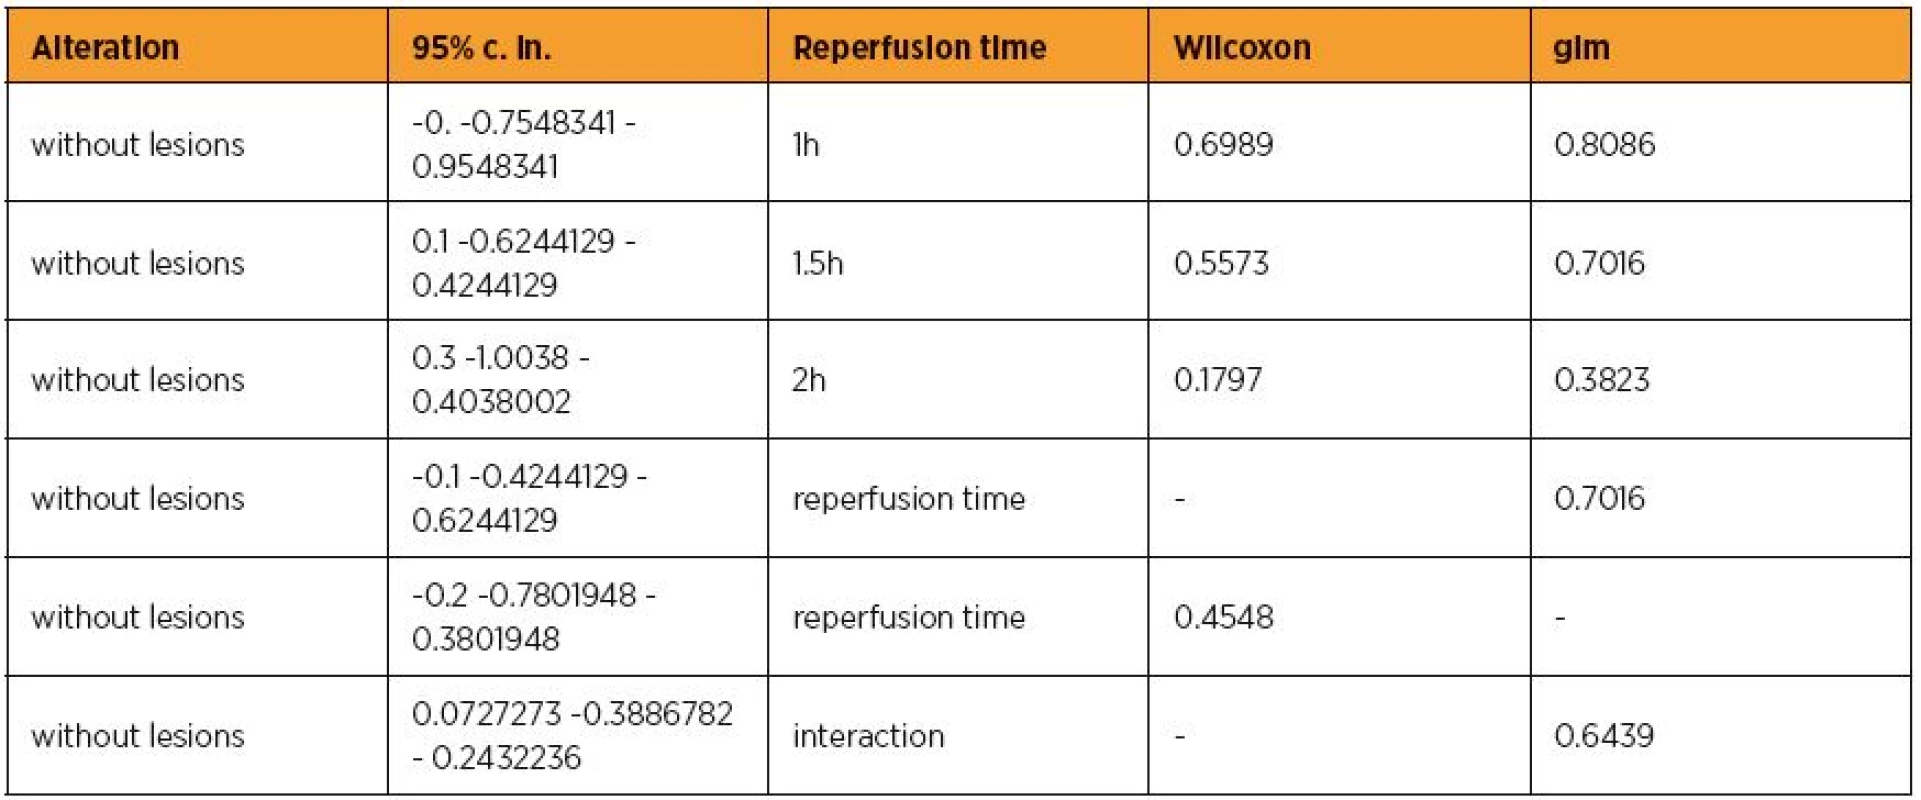 The alteration influence of erythropoietin in connection with reperfusion time p-values